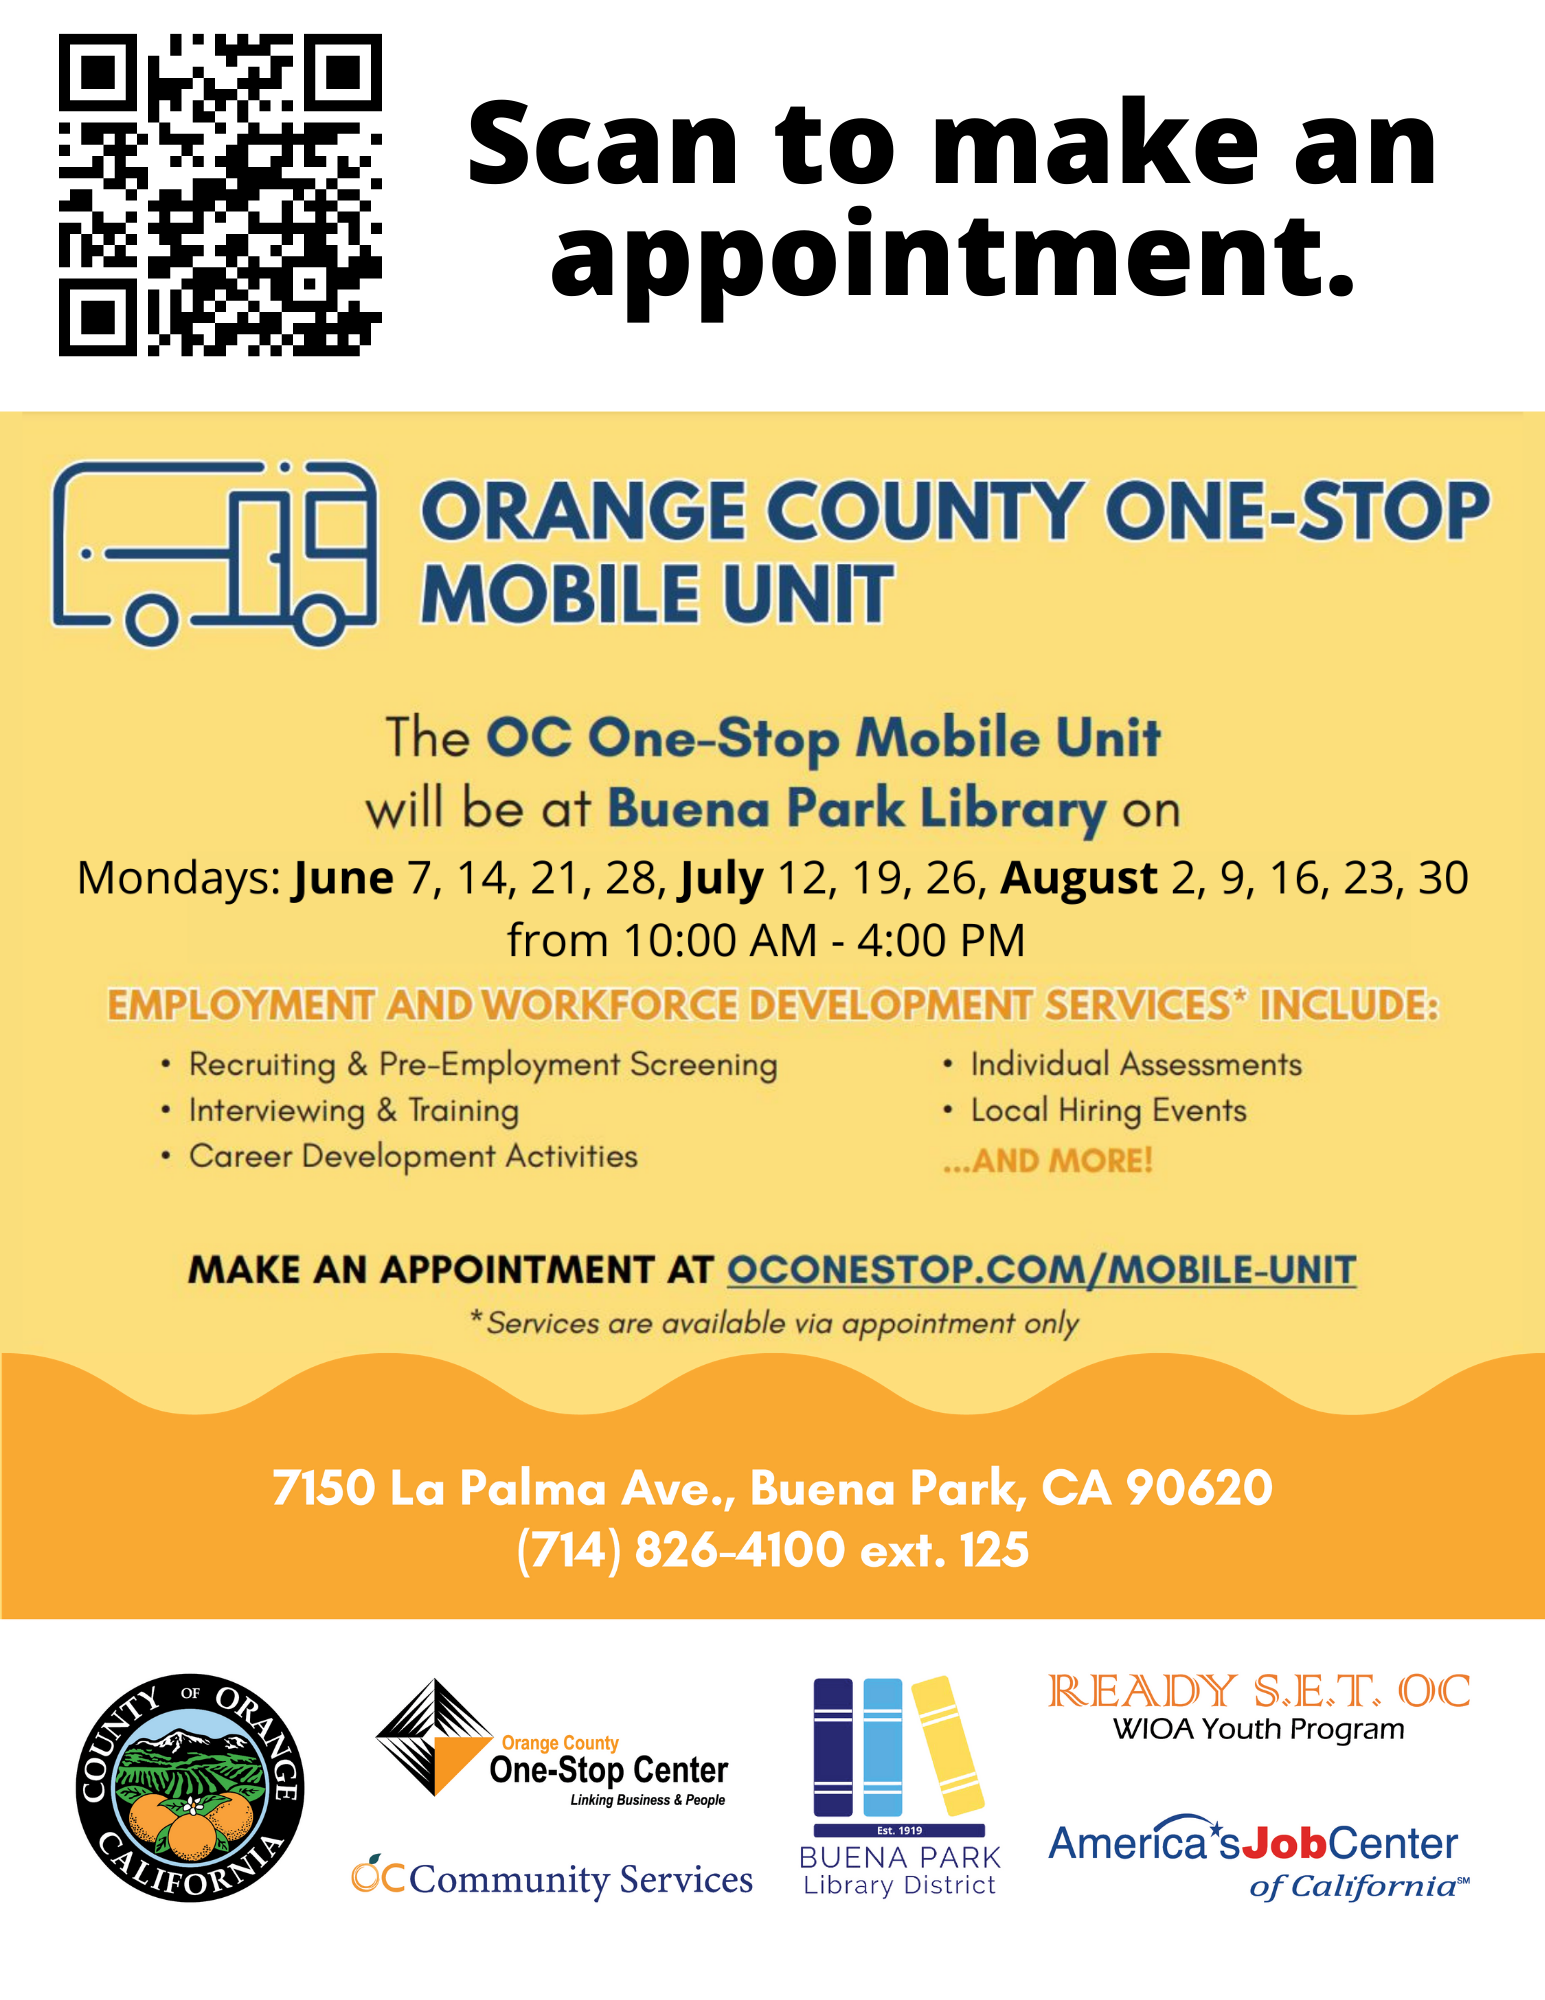 Orange County Mobile Unit continues through the summer, offering workforce and employment services in the City of Buena Park.